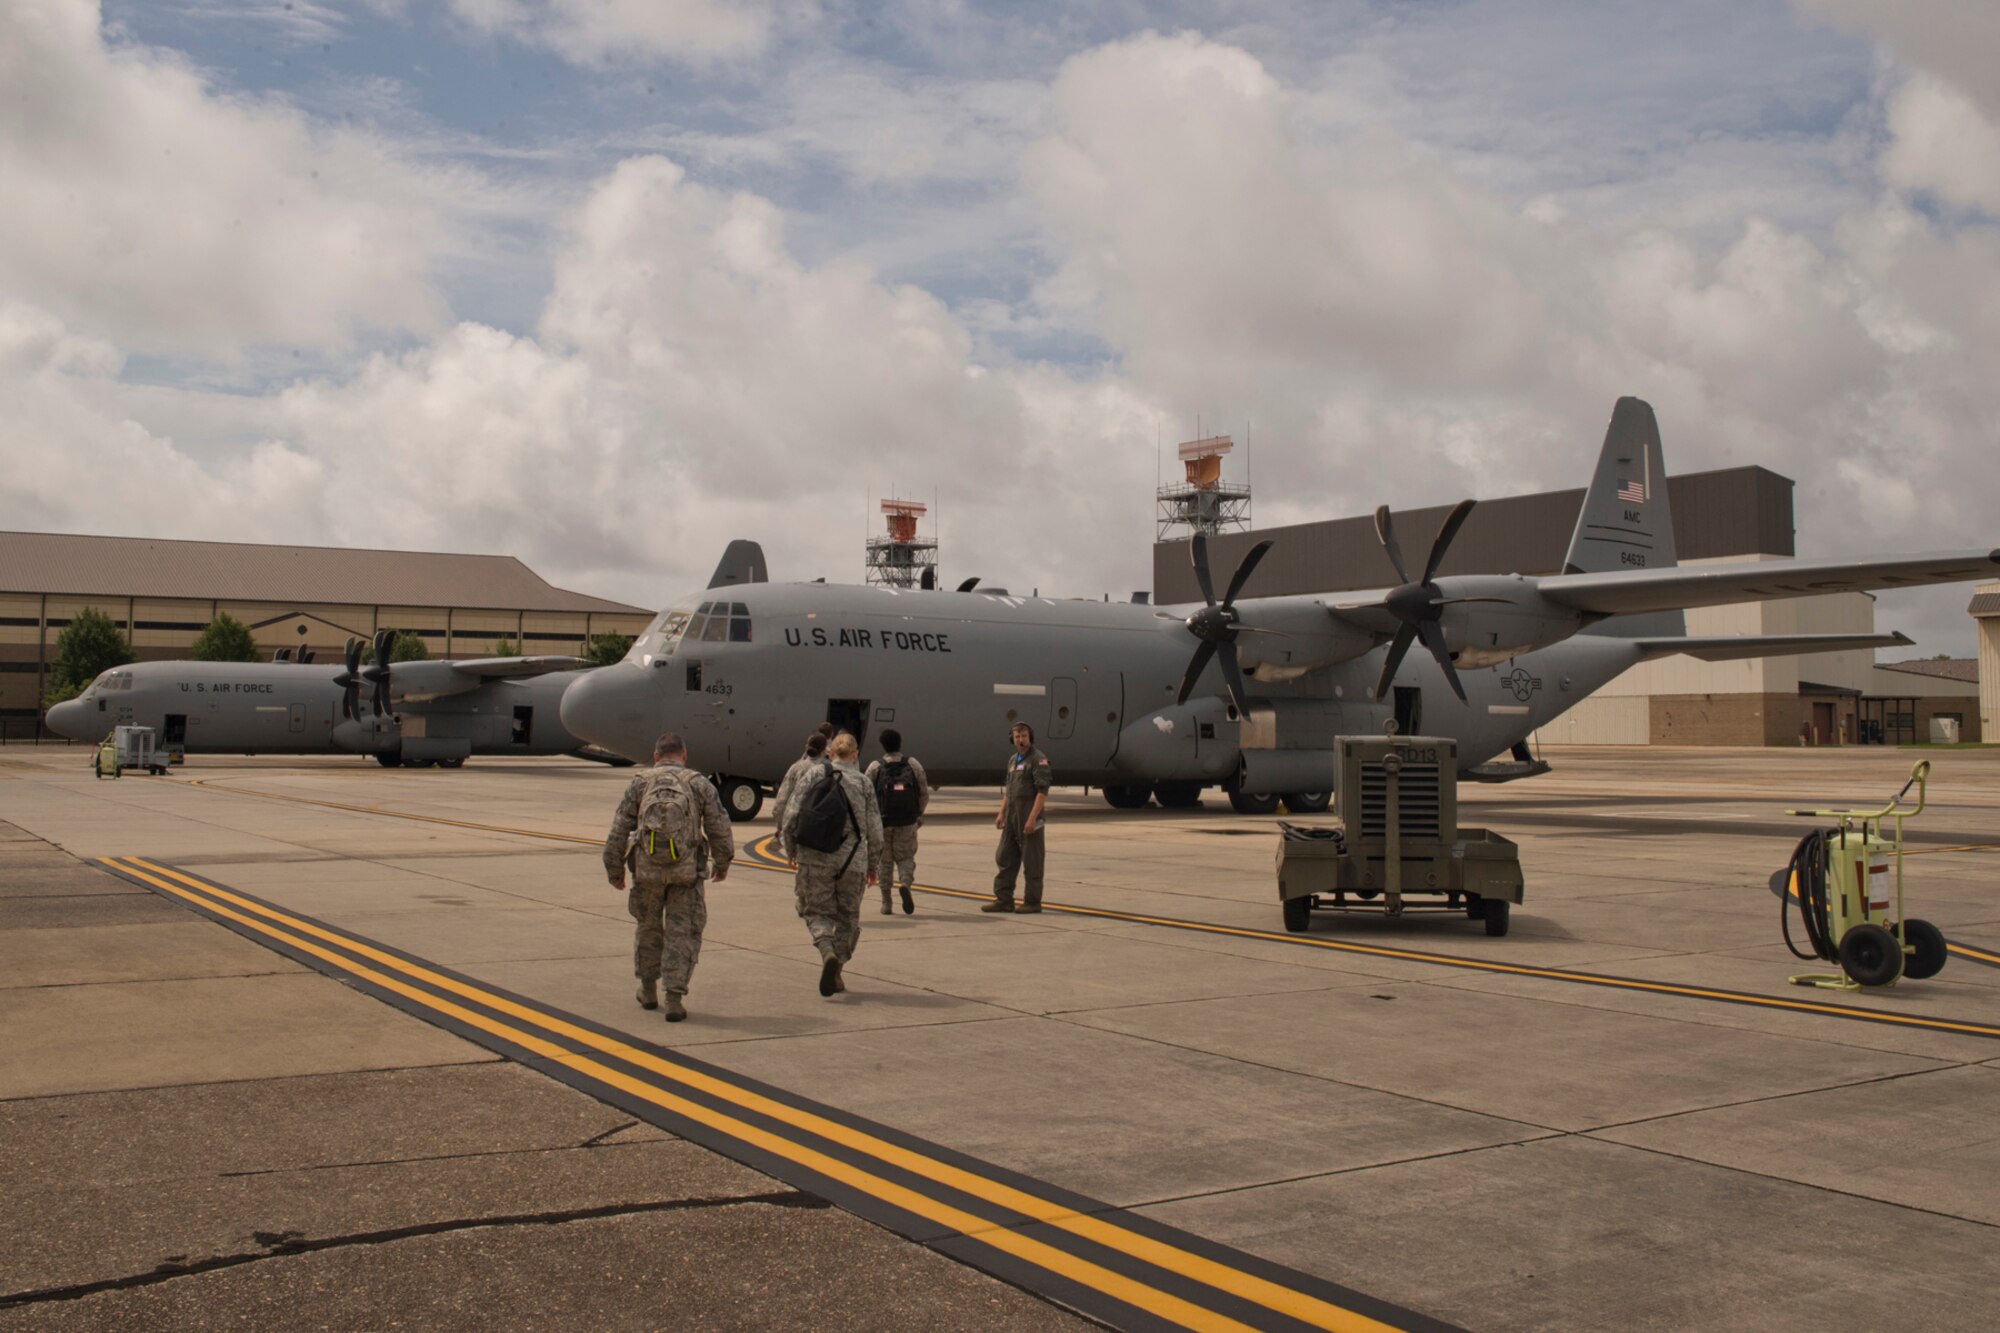 U.S. Air Force Reserve Airmen from the 913th Airlift Group board a C-130J Super Hercules bound for Arkansas June 4, 2017, at Keesler Air Force Base, Miss. Approximately 45 Airmen from the 913 AG deployed to Keesler to take part in Prime Horizon, an exercise which was designed to test the Group’s ability to deploy and re-deploy a two-ship package carrying passengers and cargo to a simulated deployed location. (U.S. Air Force photo by Master Sgt. Jeff Walston/Released)